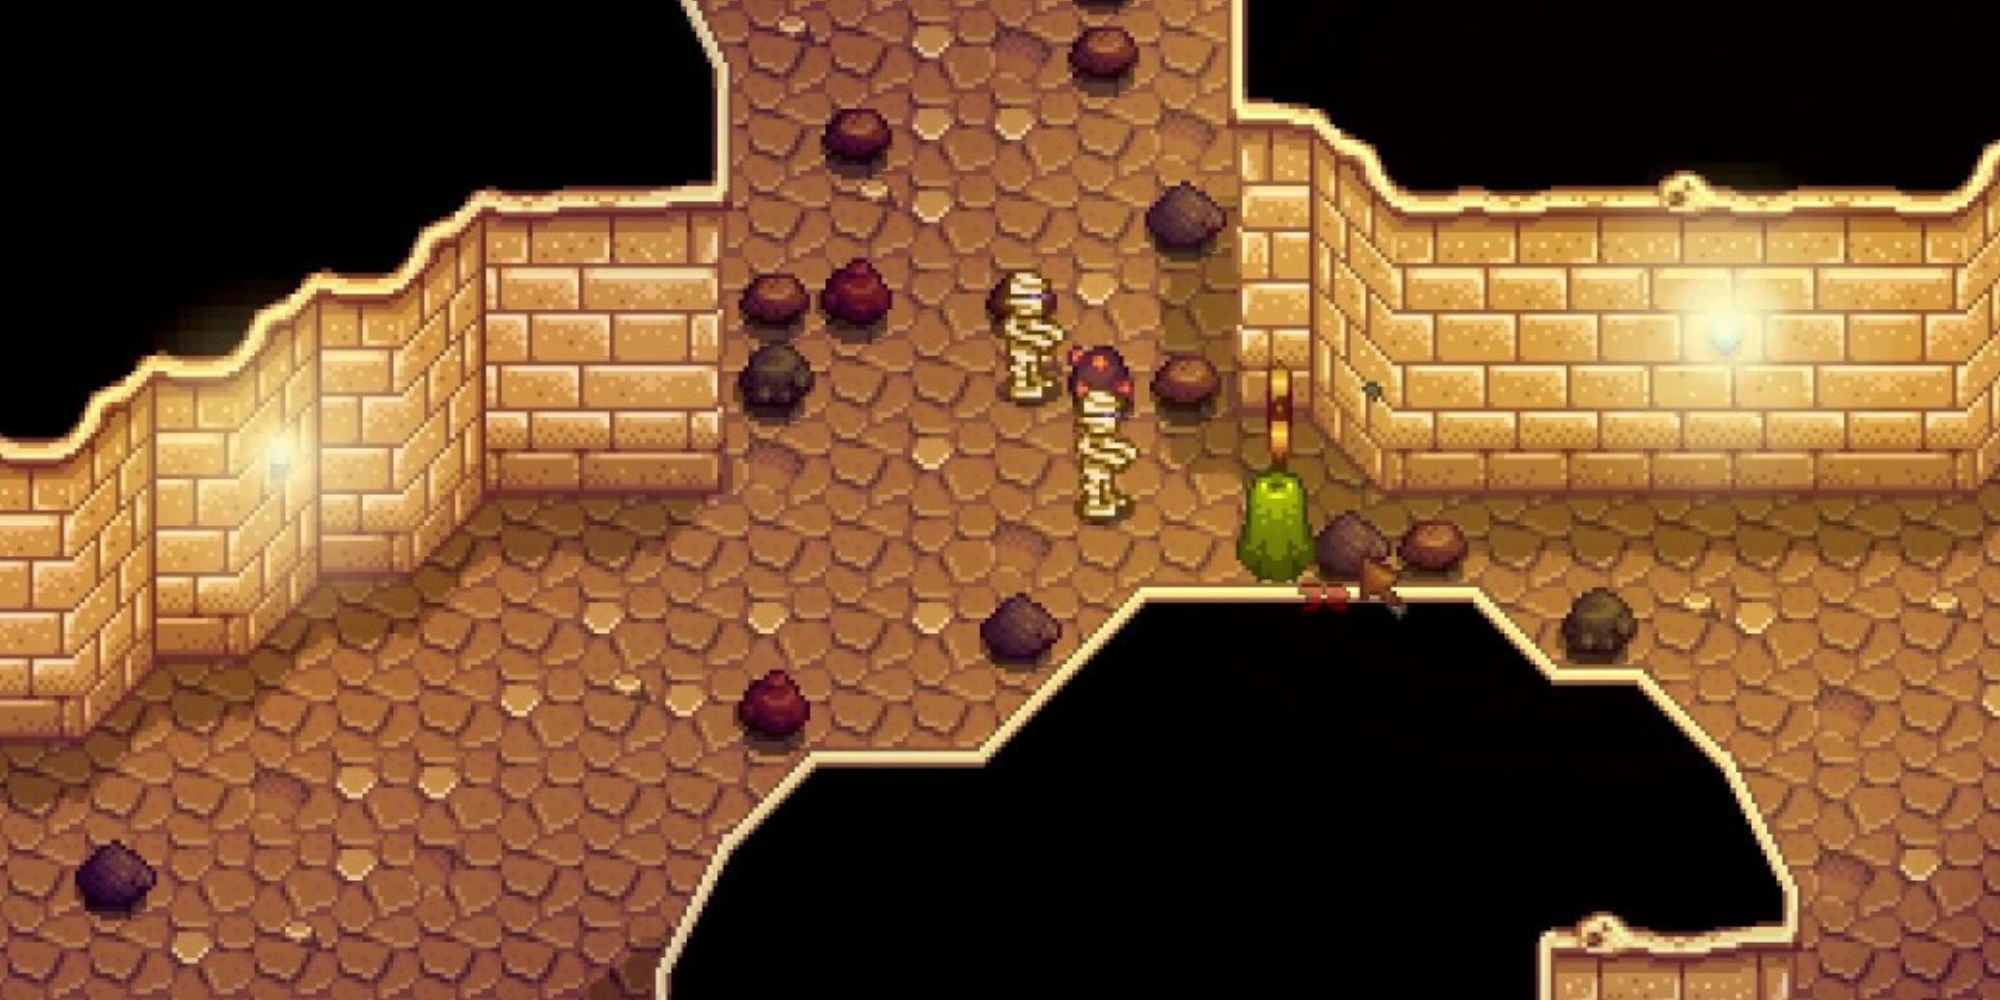 Several Mummys approaching the Player in Skull Cavern